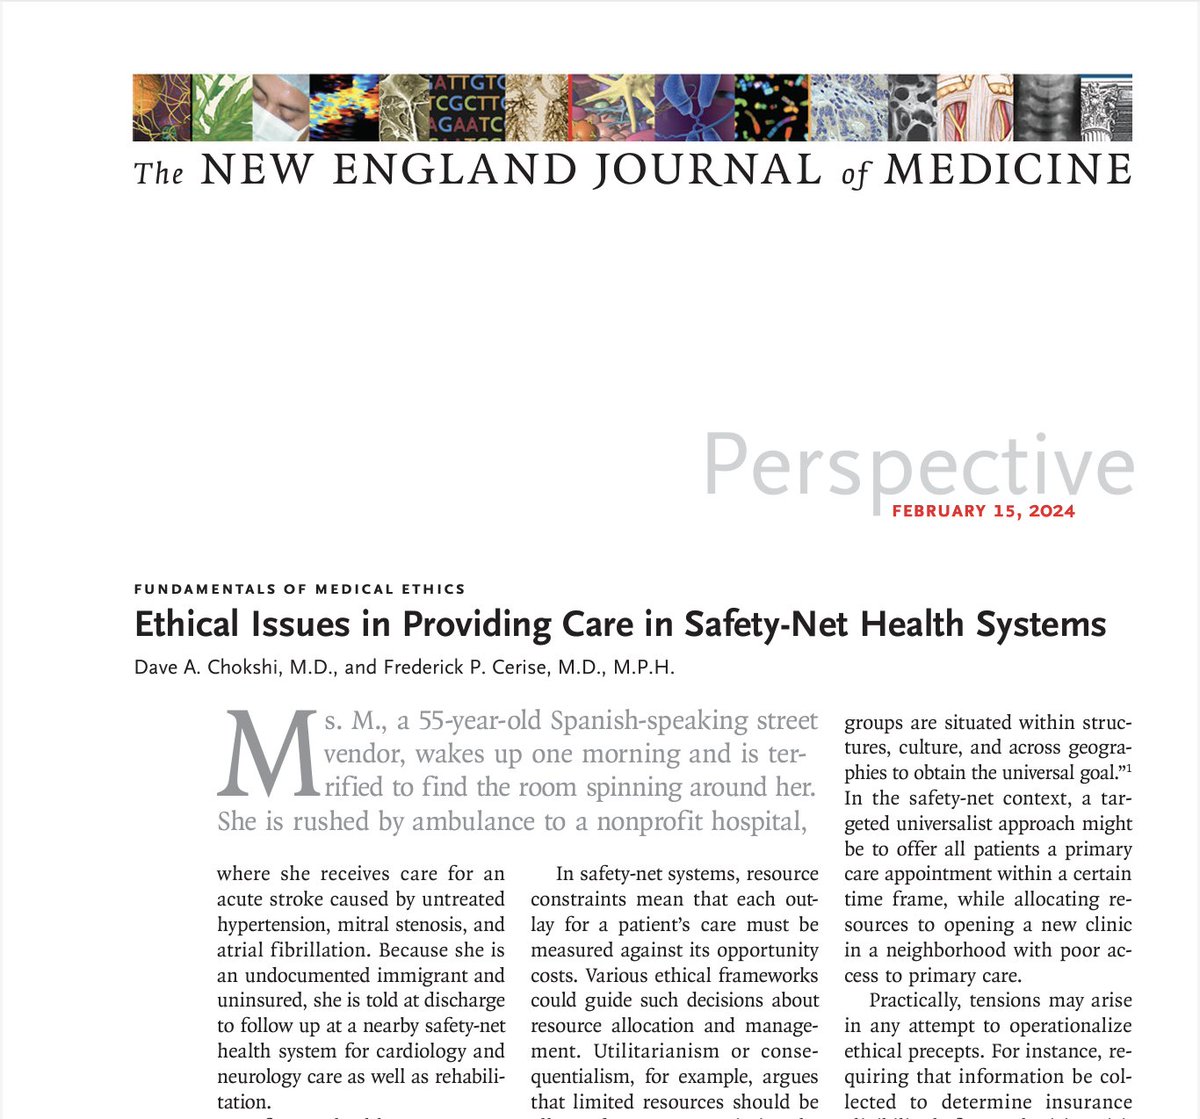 Writing this essay felt very meaningful, as I'll mark a decade of practice in a safety-net system later this year. Even more so to co-author it with Dr. Fred Cerise, the mentor who first inspired me with his commitment to the mission of public hospitals. nejm.org/doi/full/10.10…